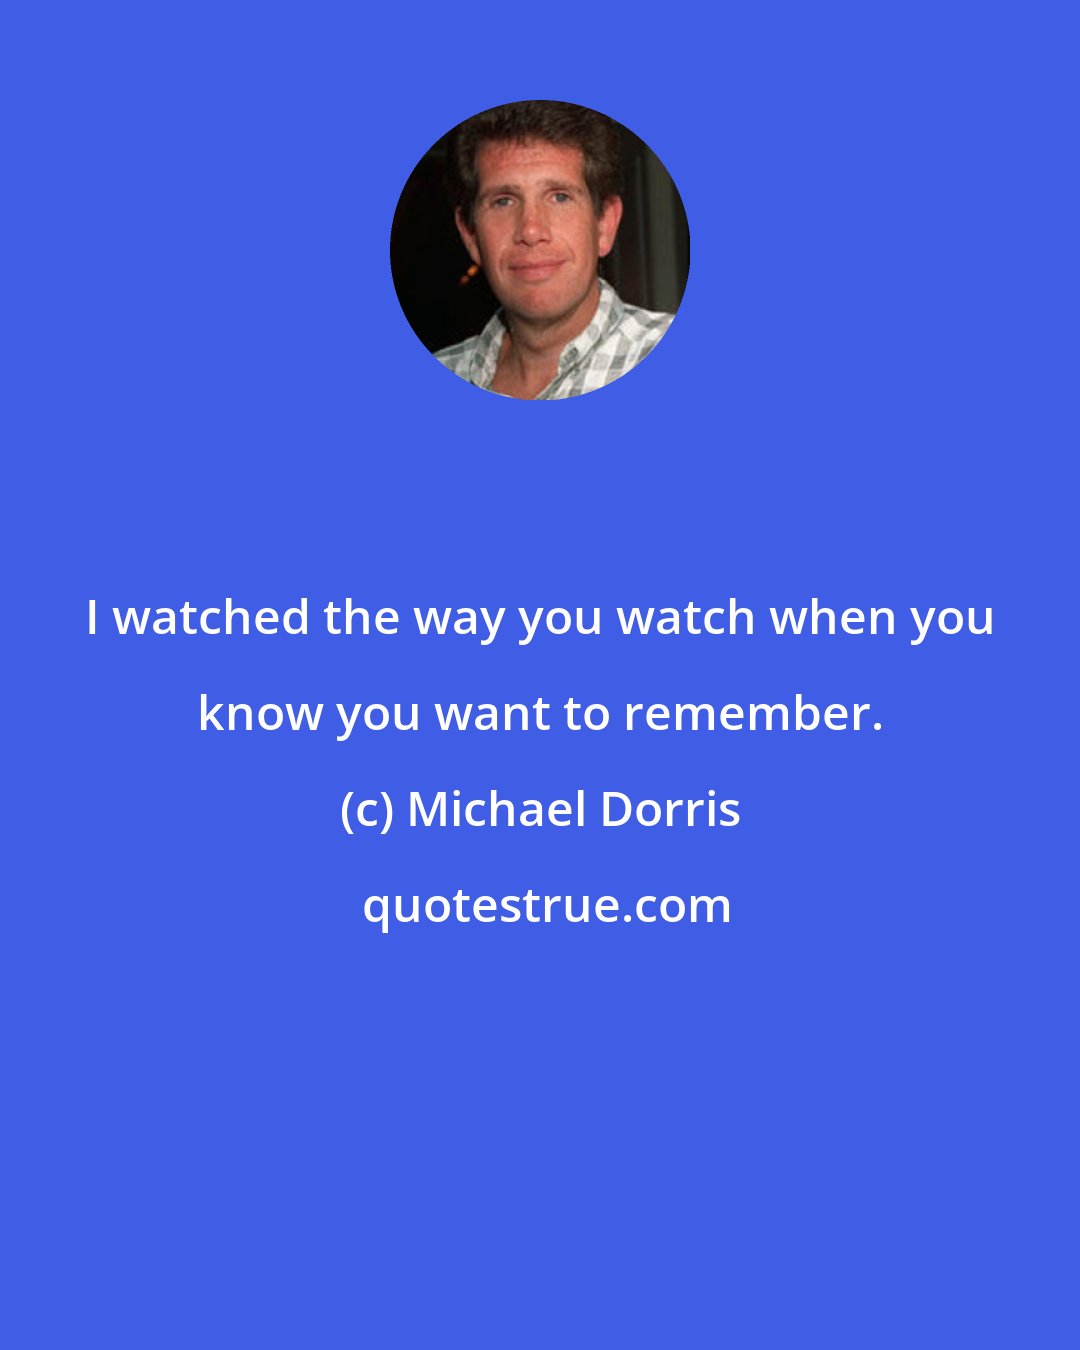 Michael Dorris: I watched the way you watch when you know you want to remember.